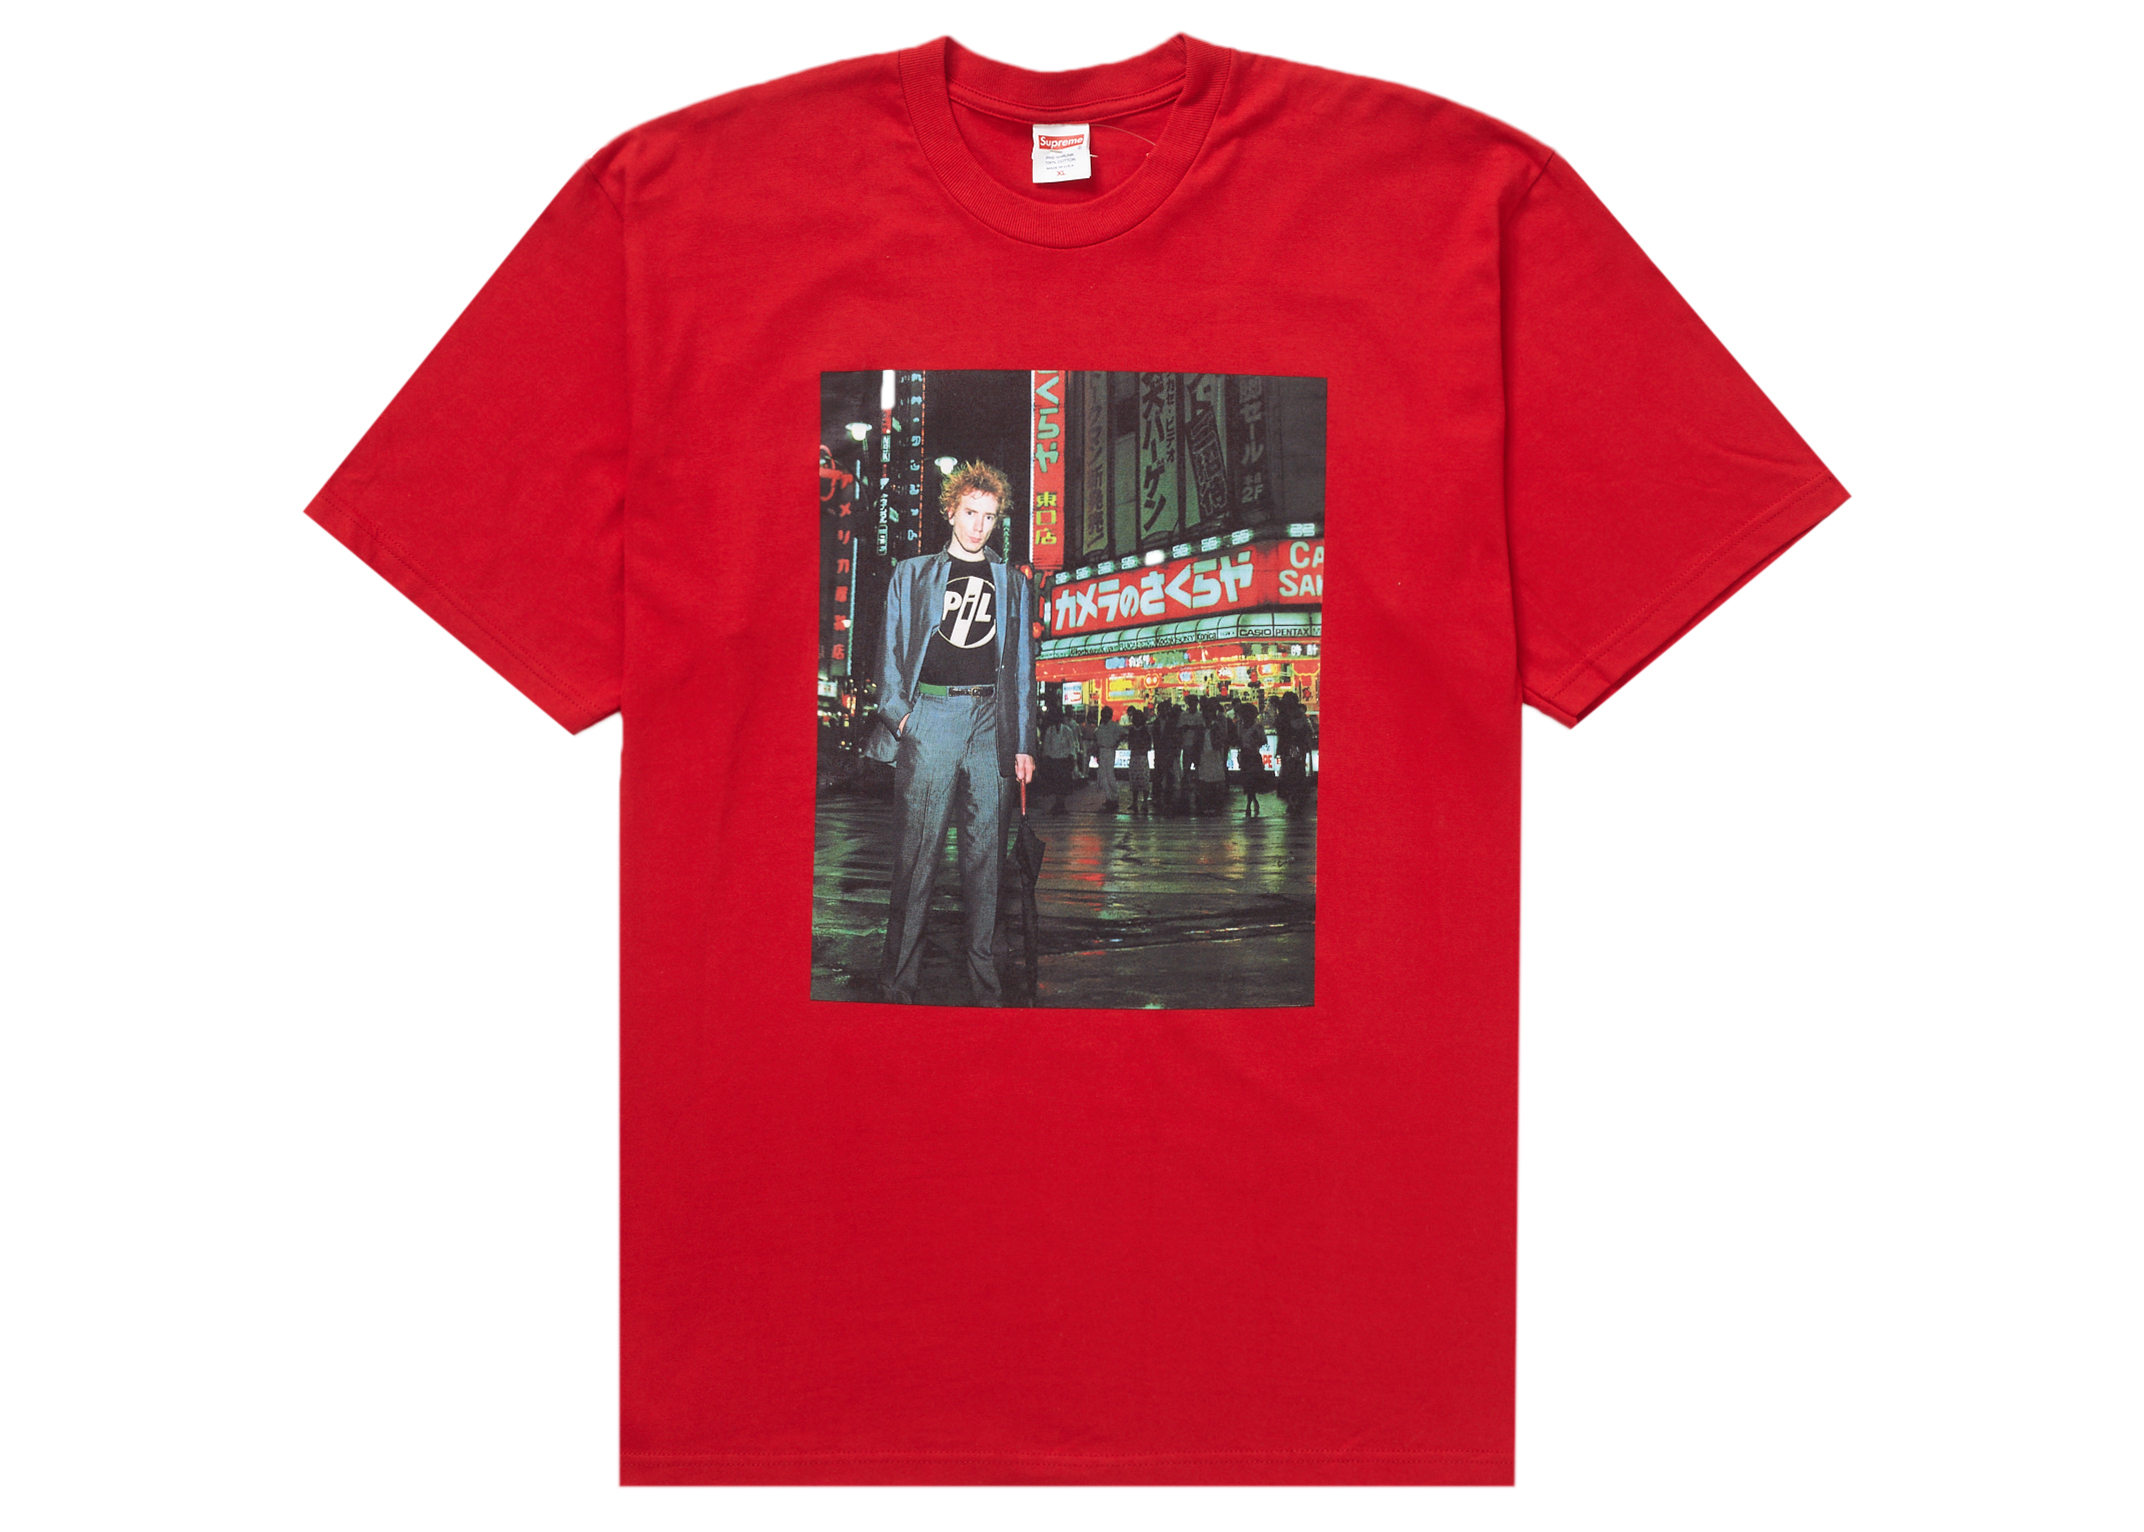 Supreme PiL Live In Tokyo Tee Red Men's - FW22 - US